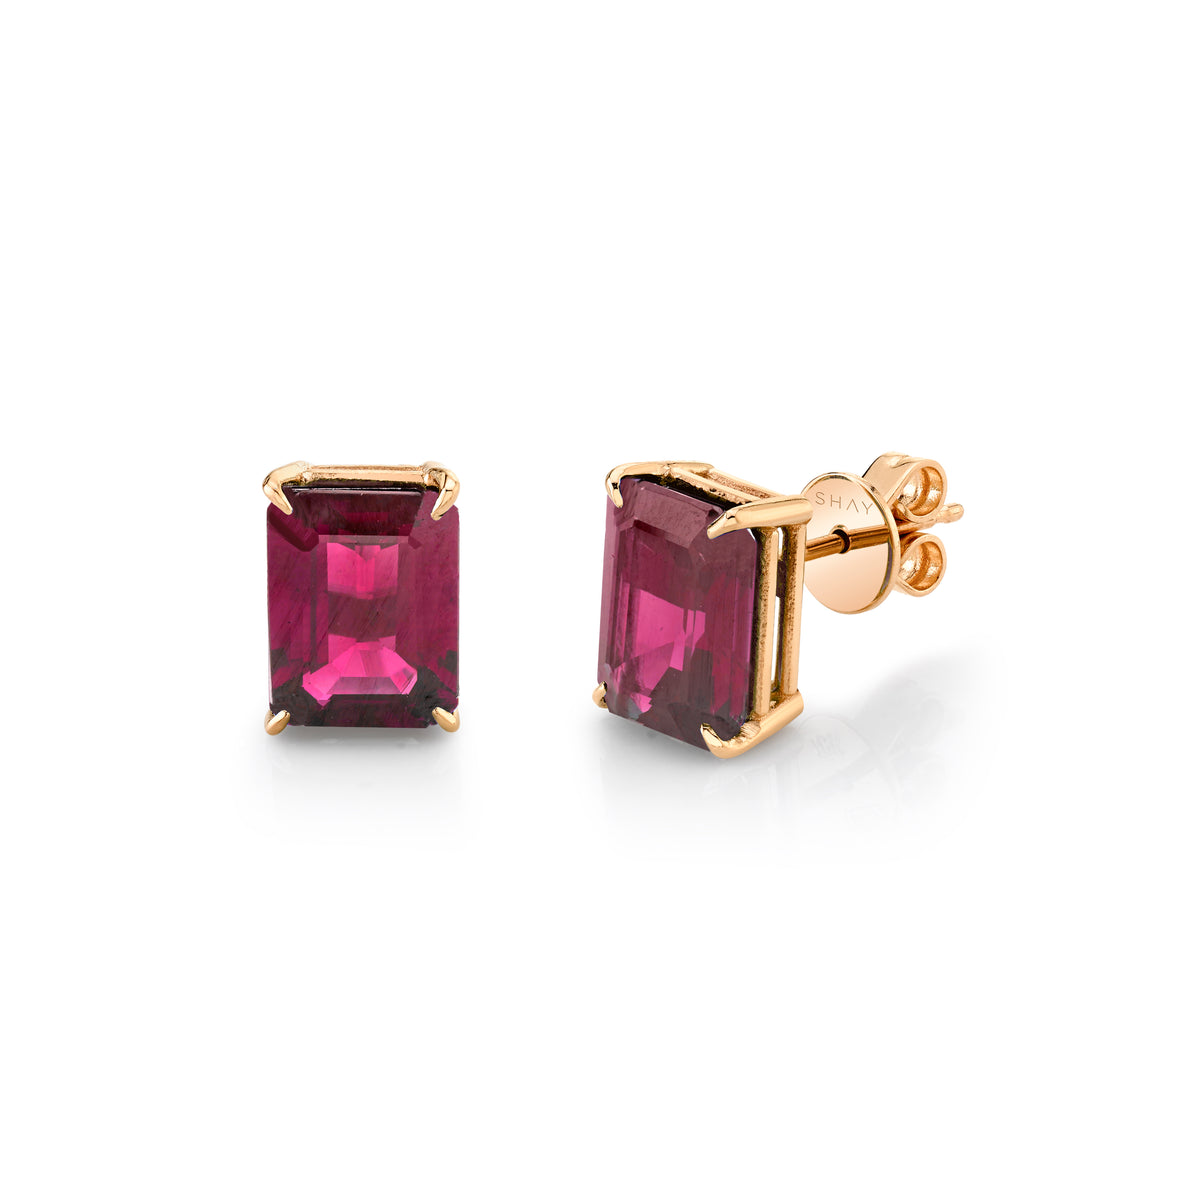 READY TO SHIP RUBY EMERALD CUT STUDS, 4 cts